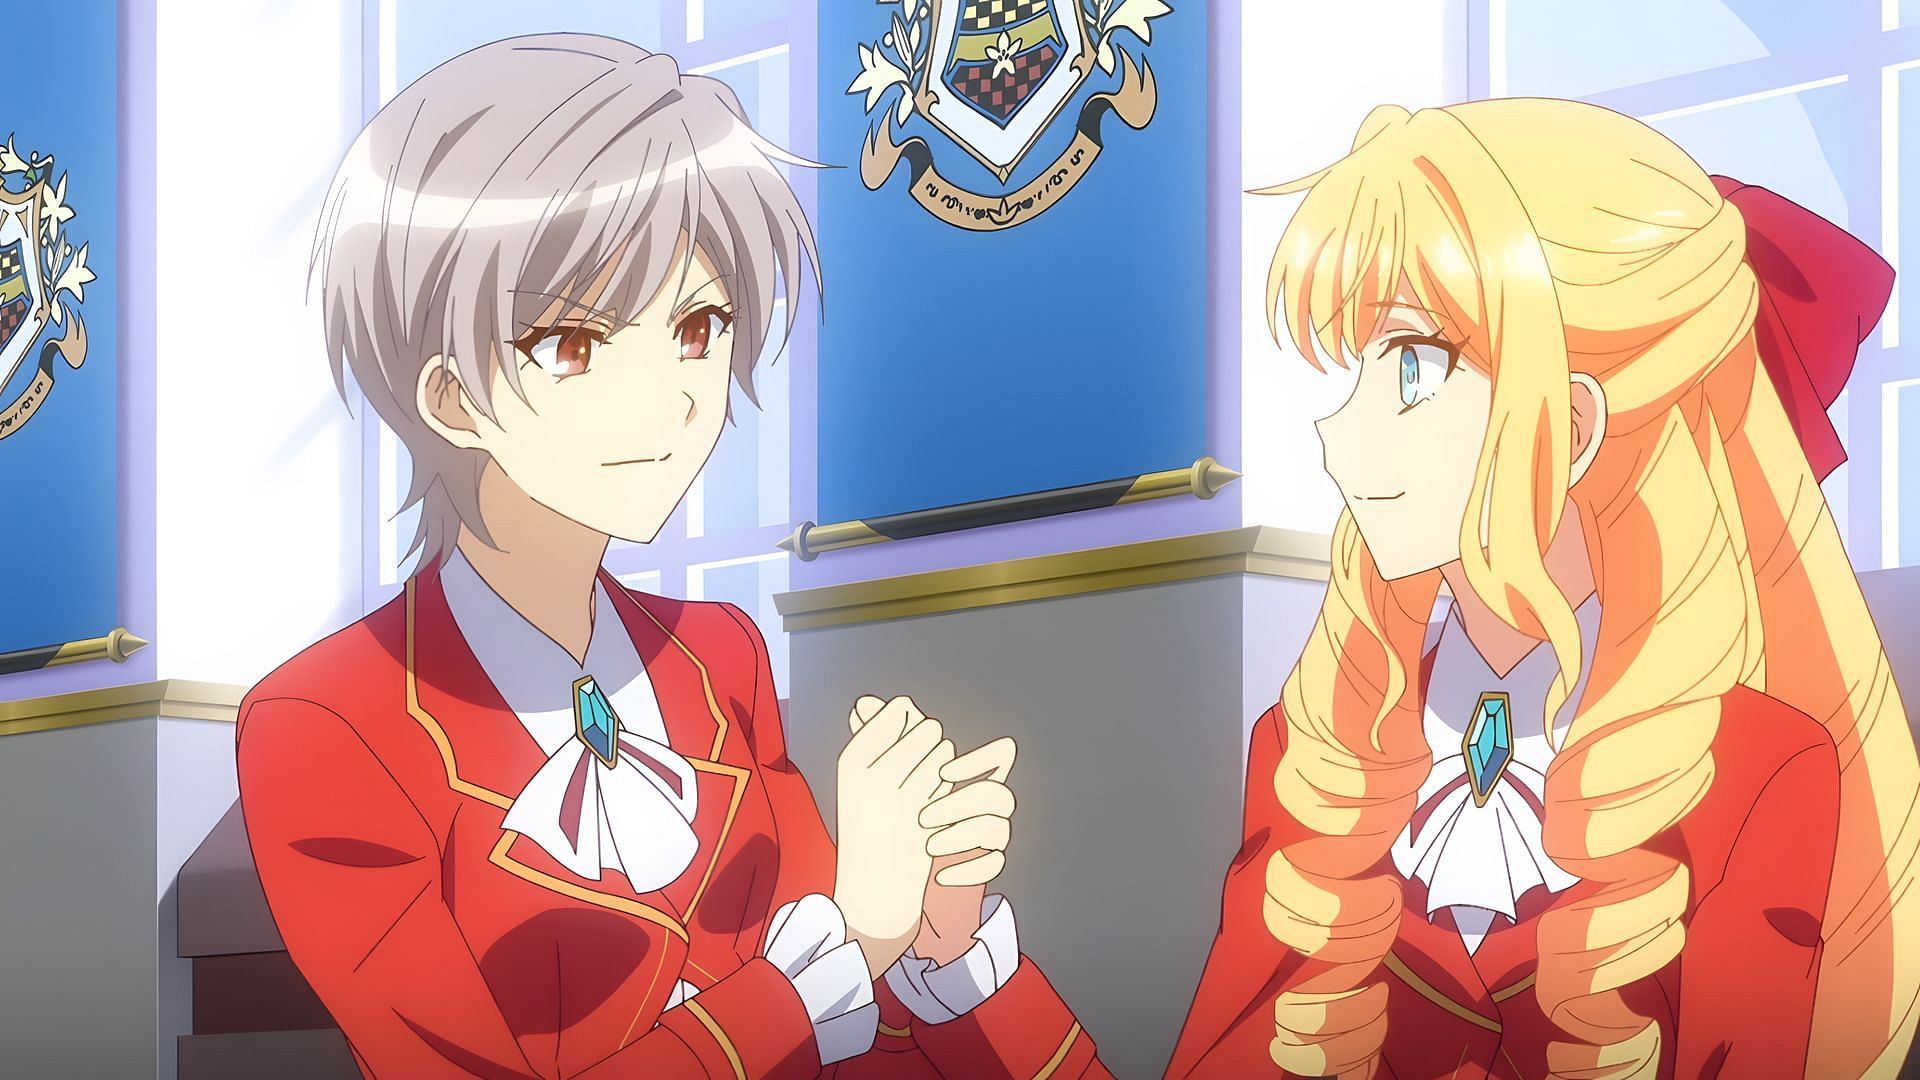 A still from the anime series featuring the main characters (Image via Platinum Vision)